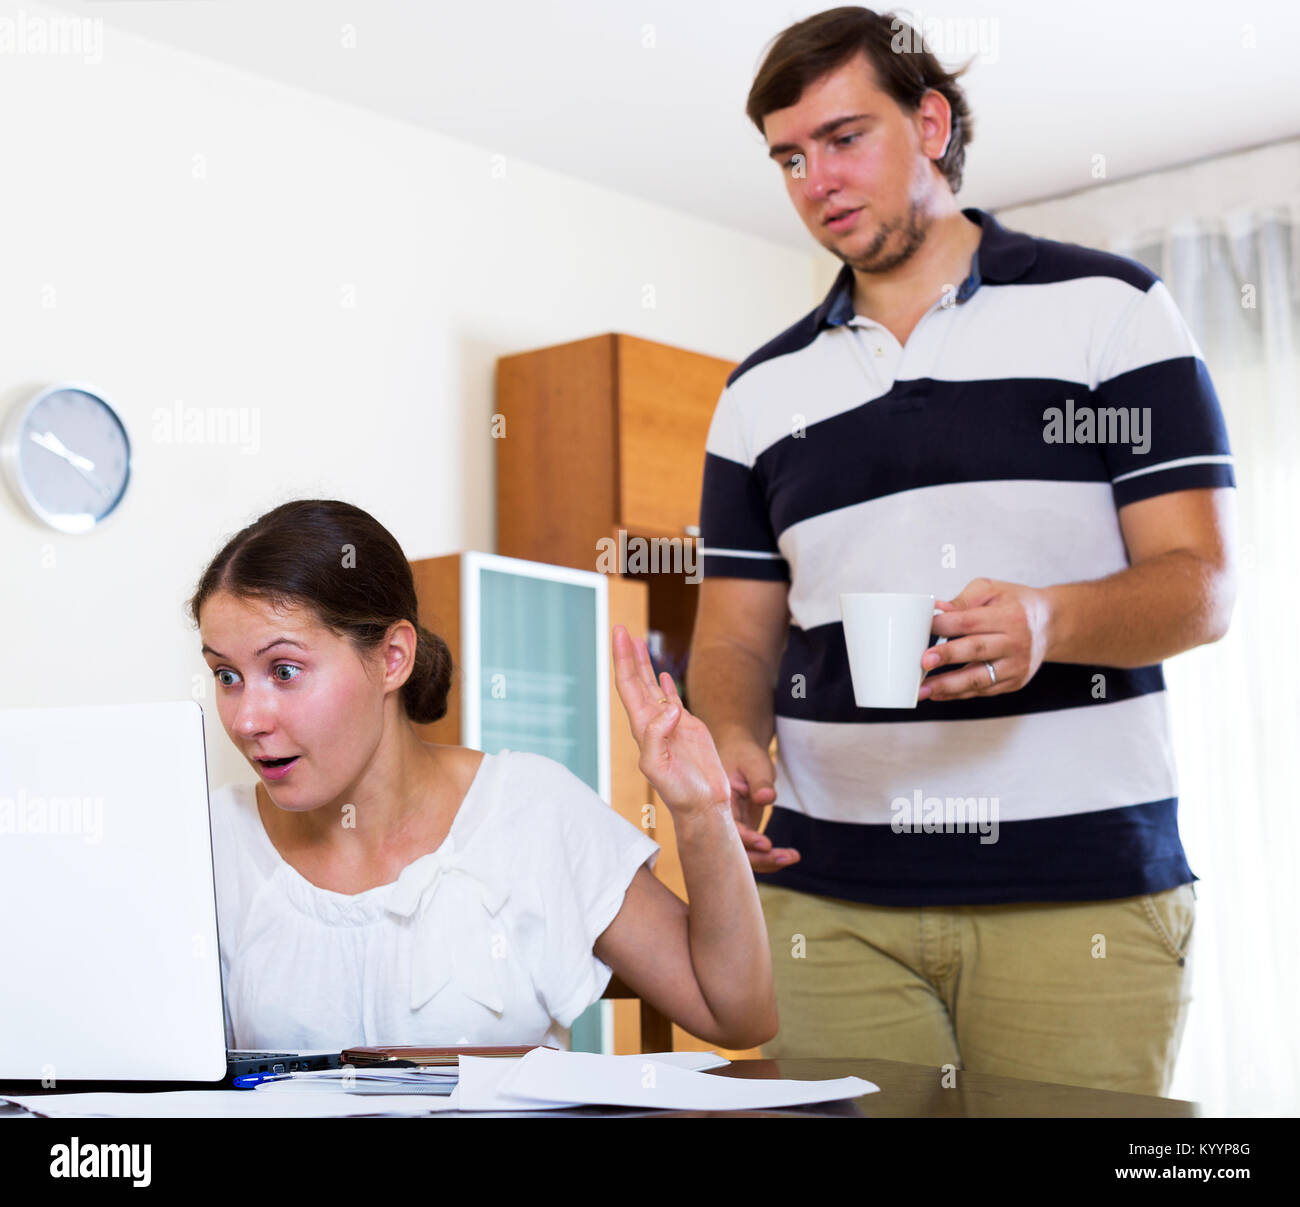 Portrait of young female working online and ignoring unhappy husband. Focus on the woman Stock Photo